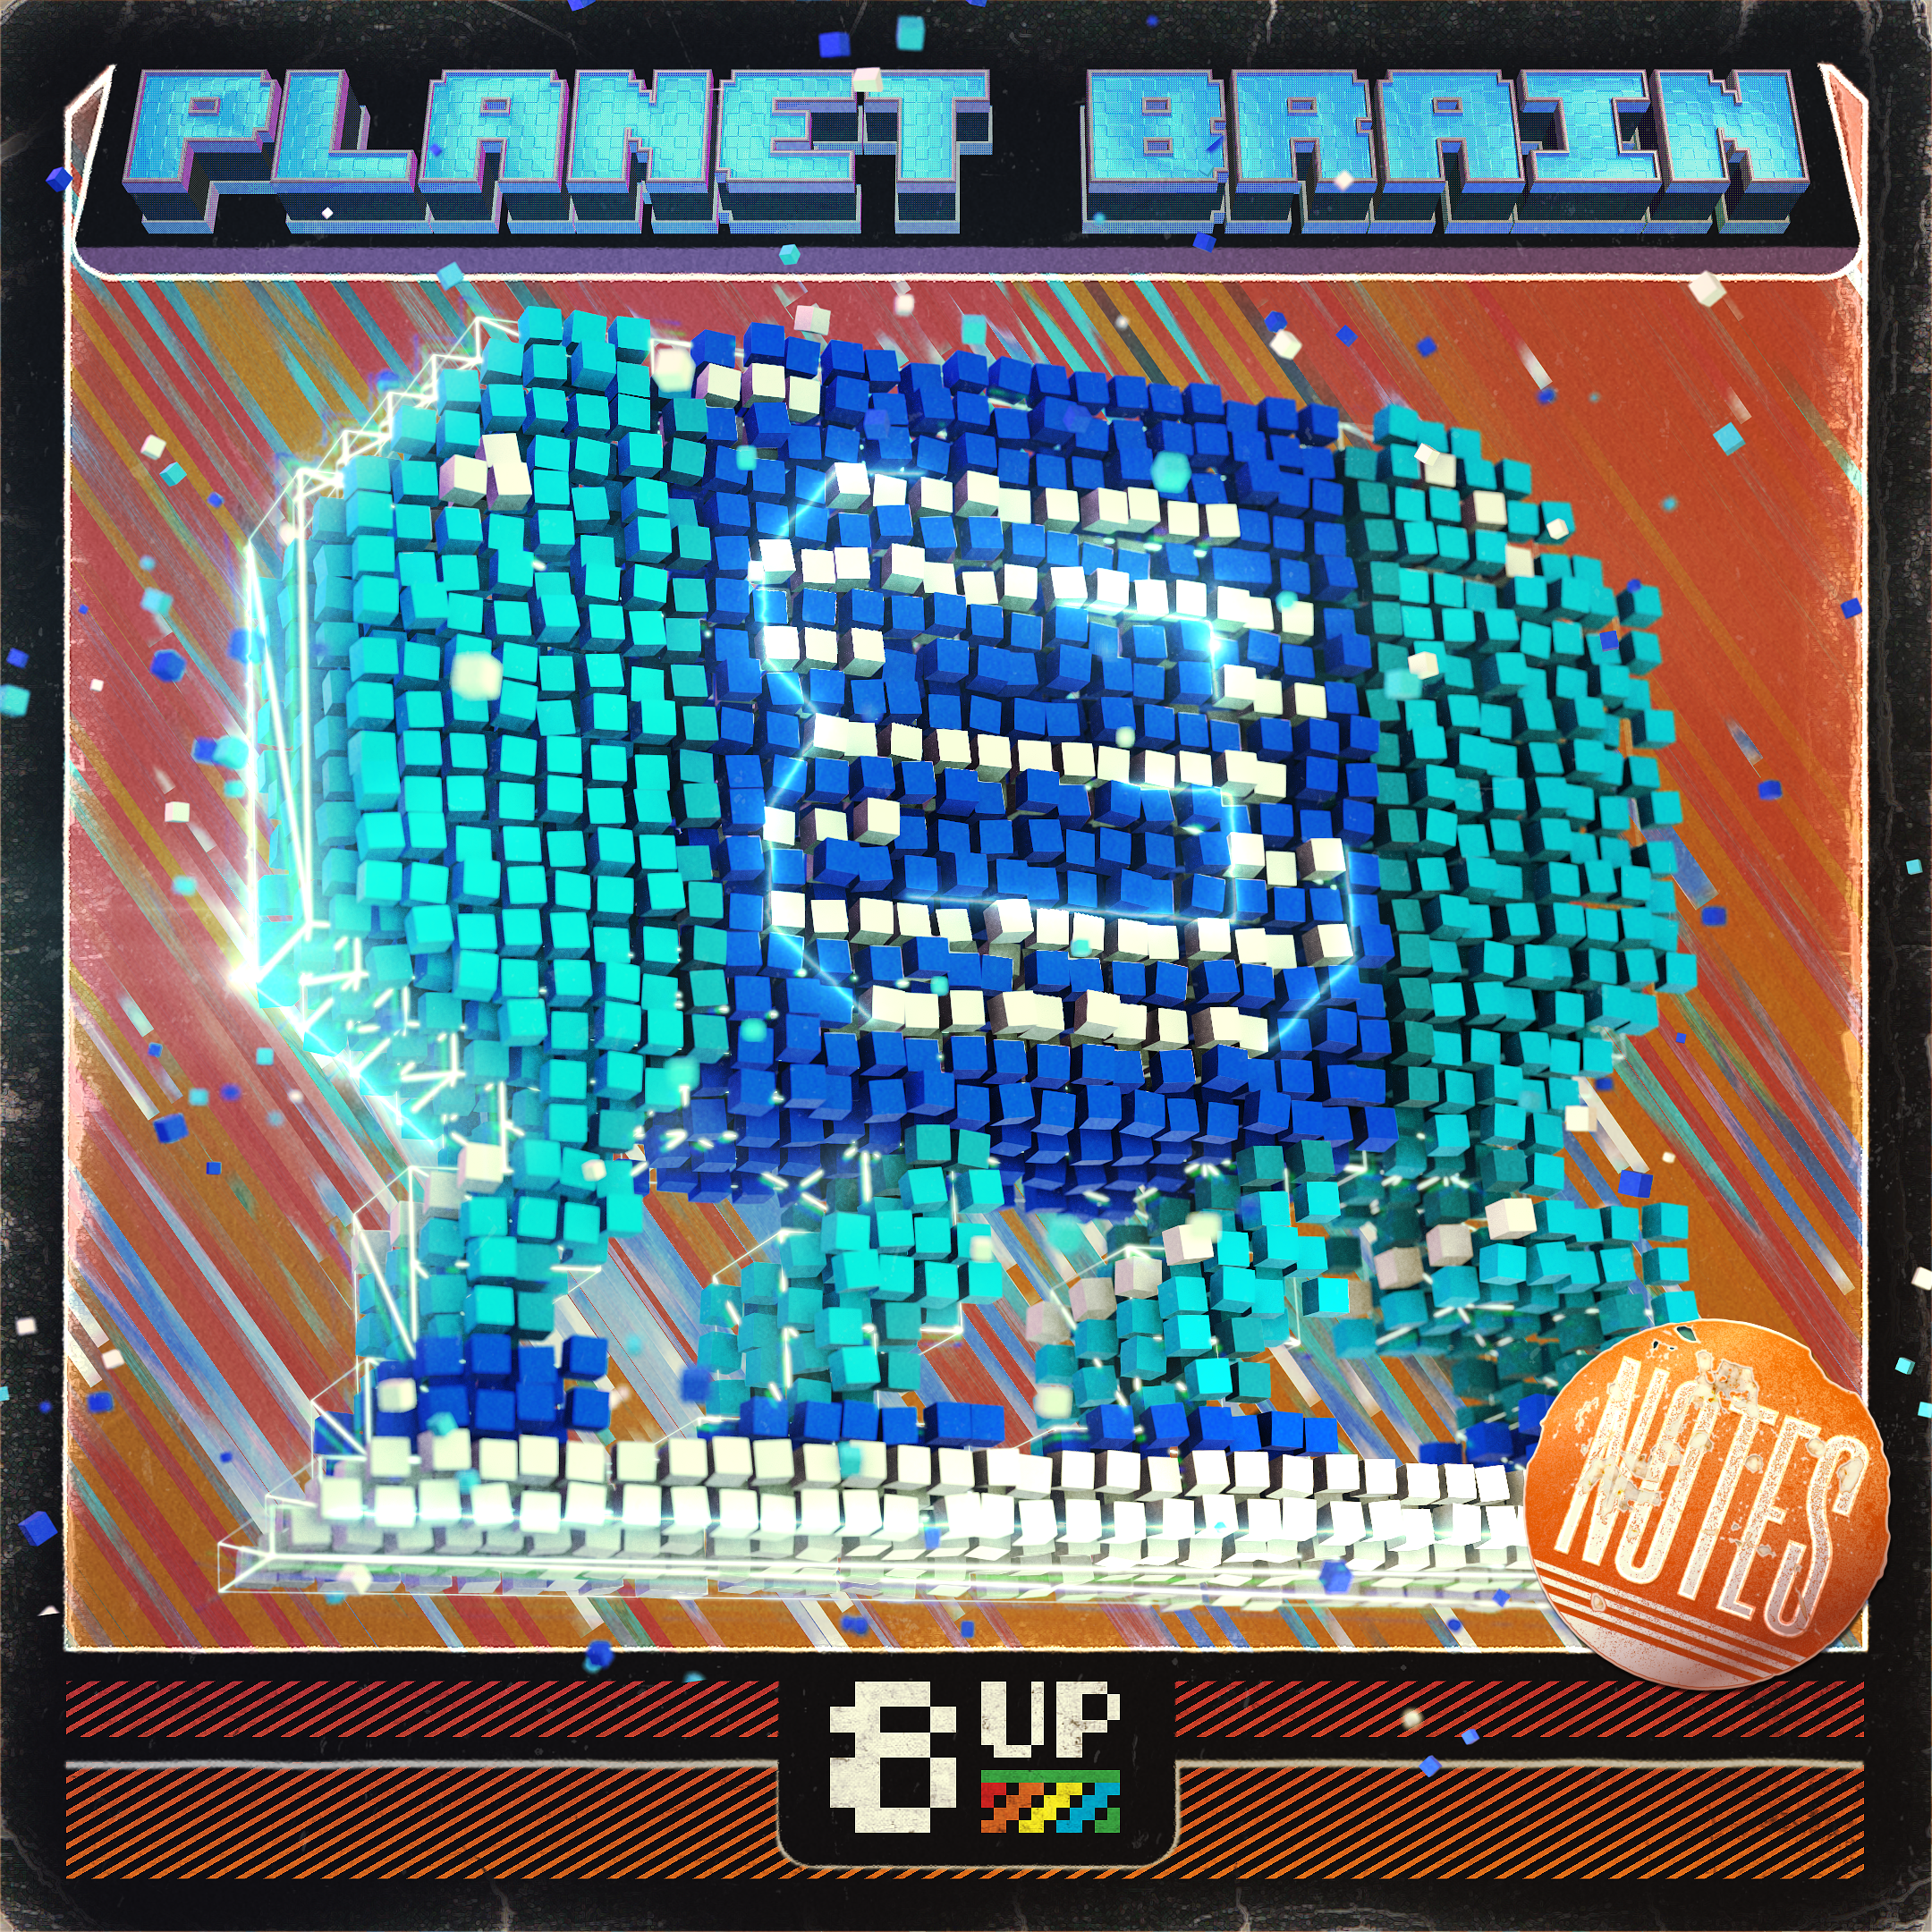 Planet Brain Notes Packshot by 8UP